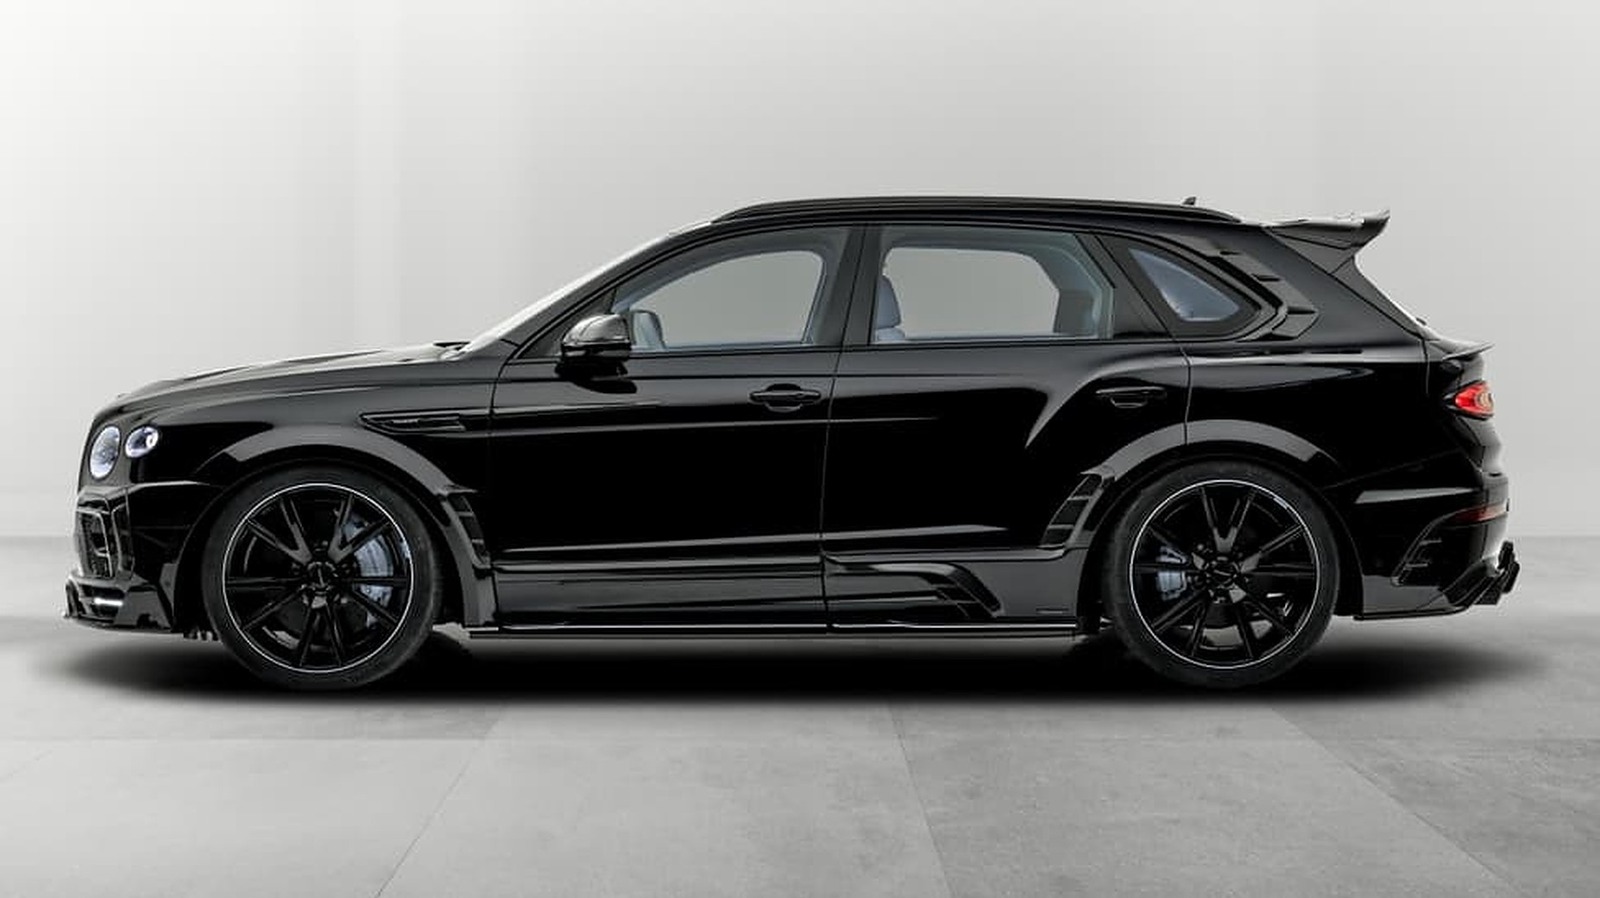 Bentley Bentayga Speed W12 By Mansory Will Shatter Your Expectations